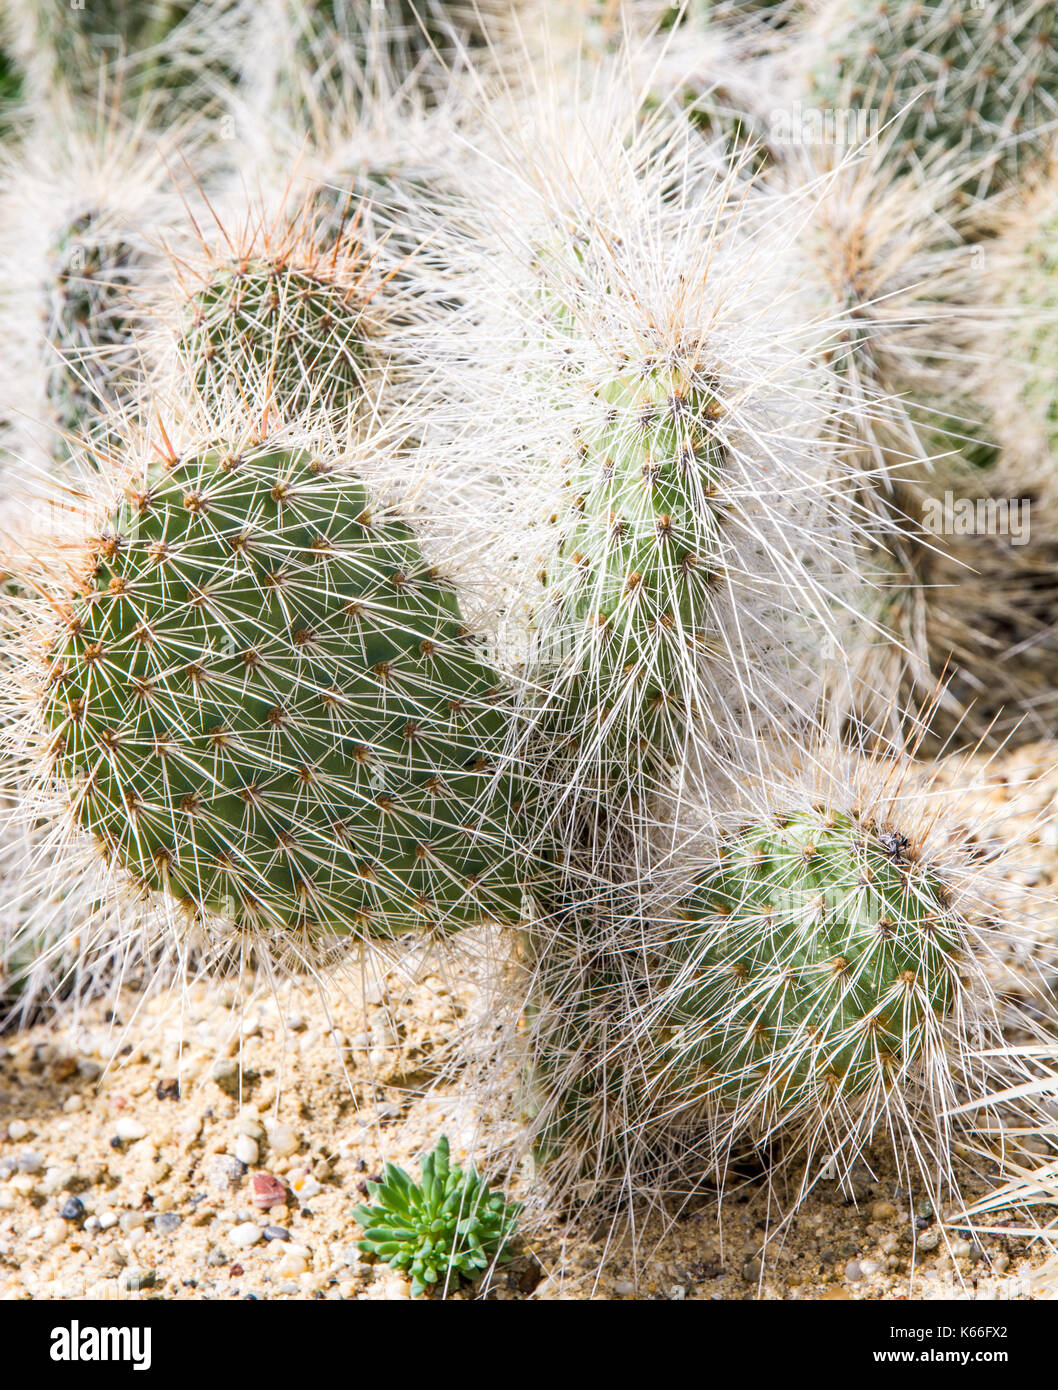 Closeup of a Pricklypear casctus with many thorns Stock Photo